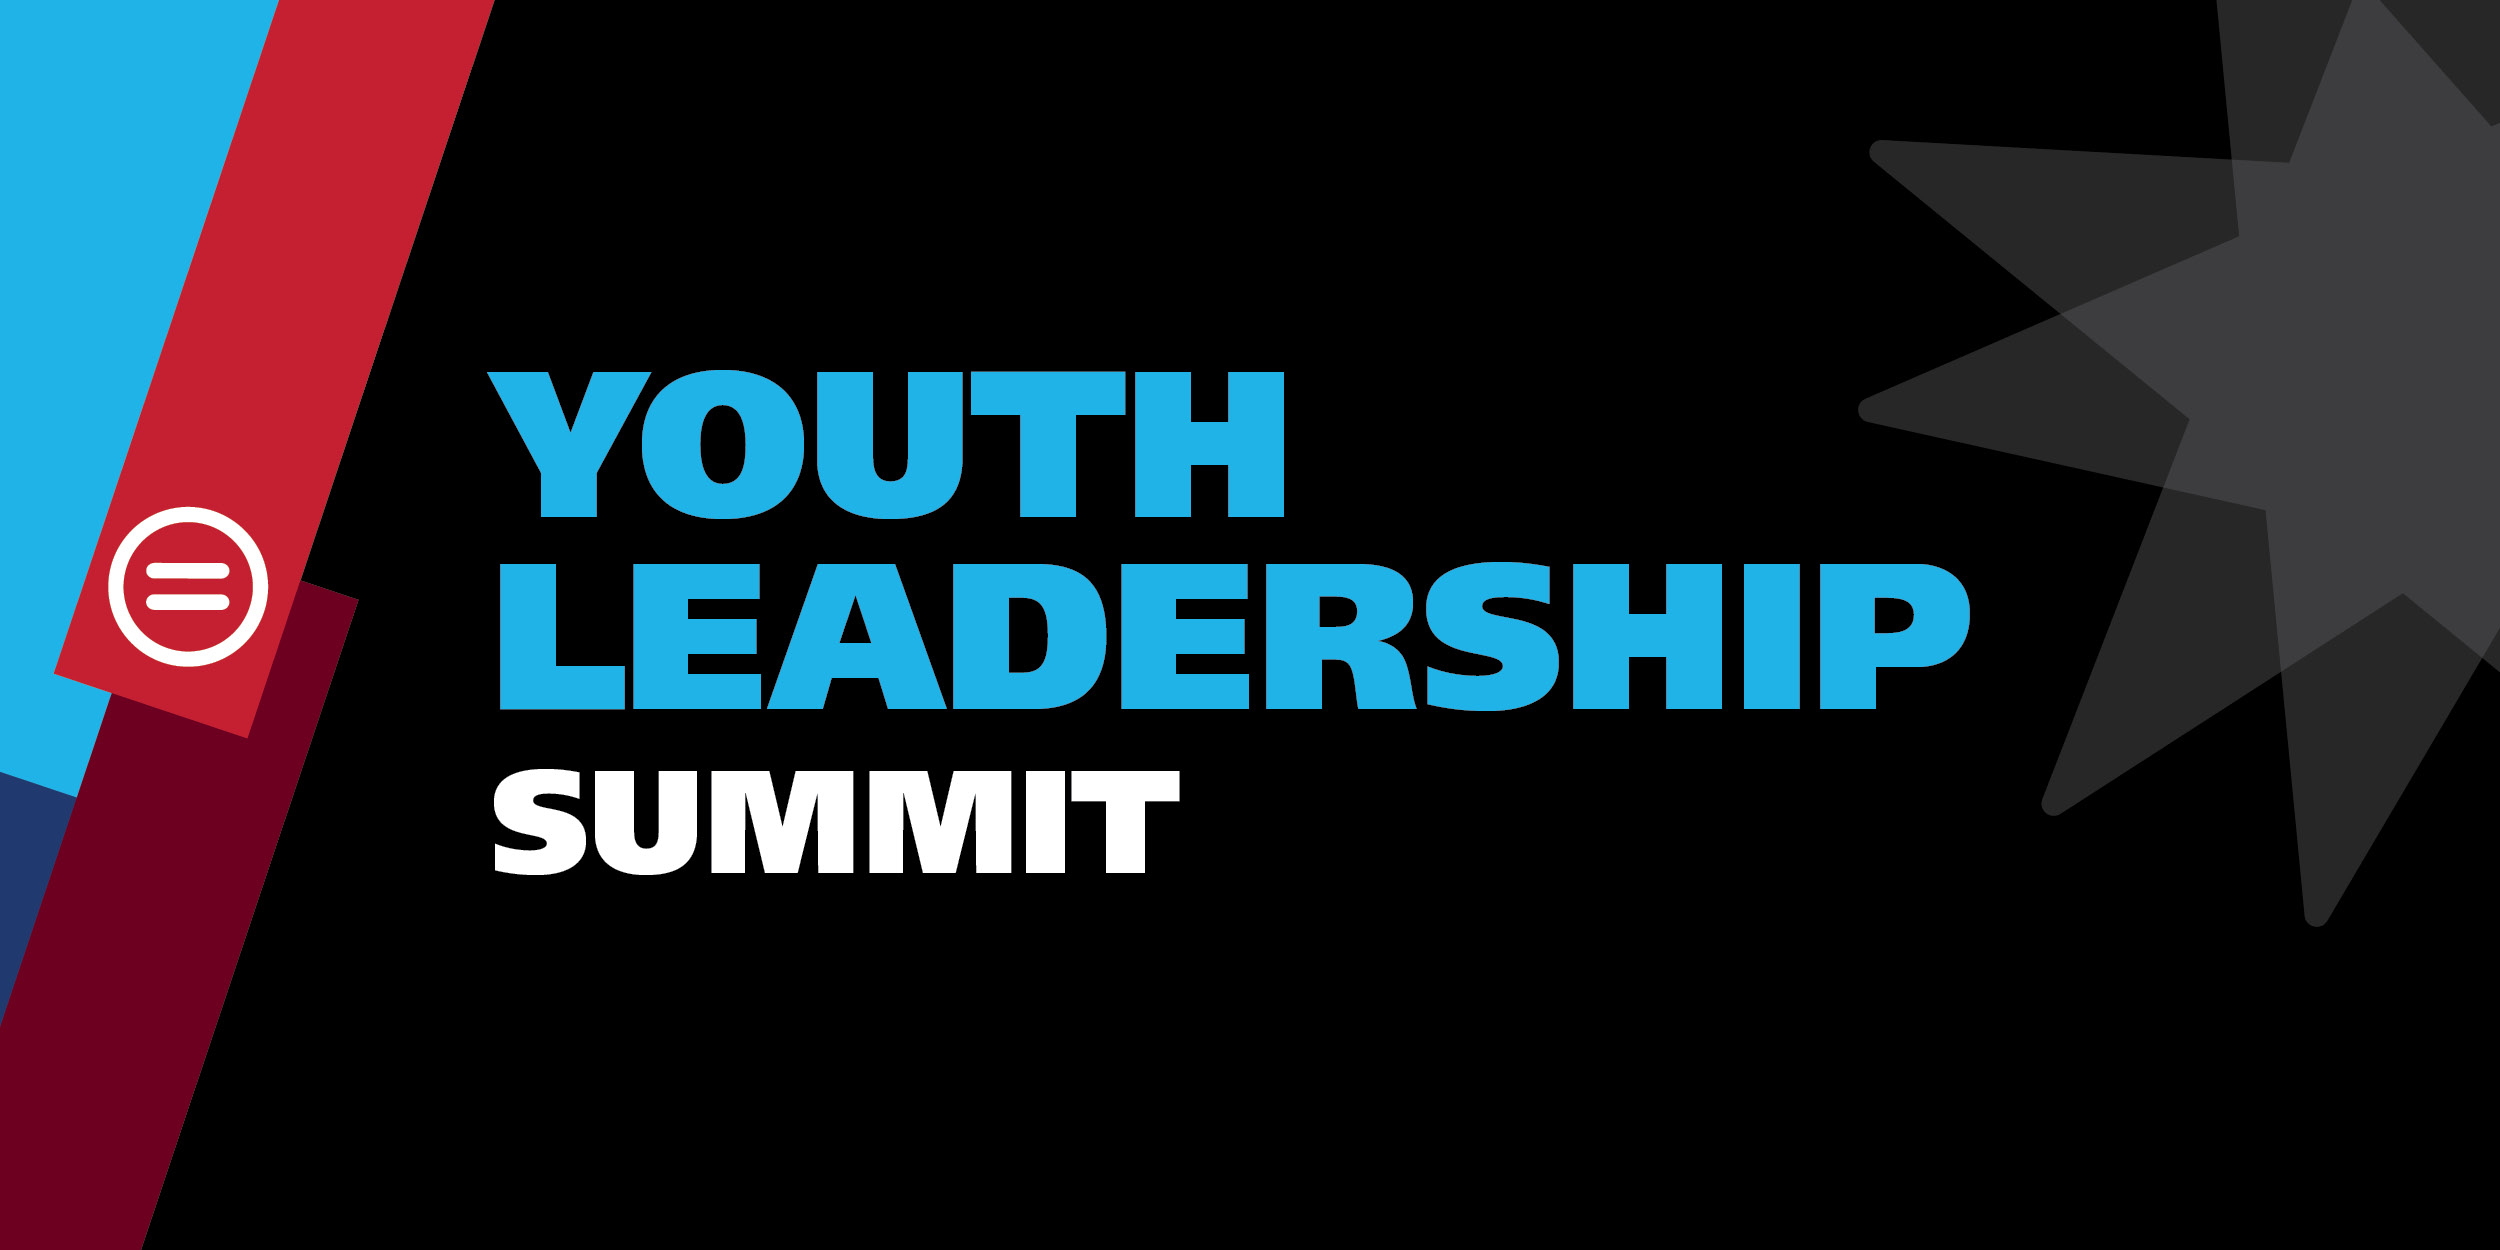 Youth Leadership Summit National Urban League Annual Conference